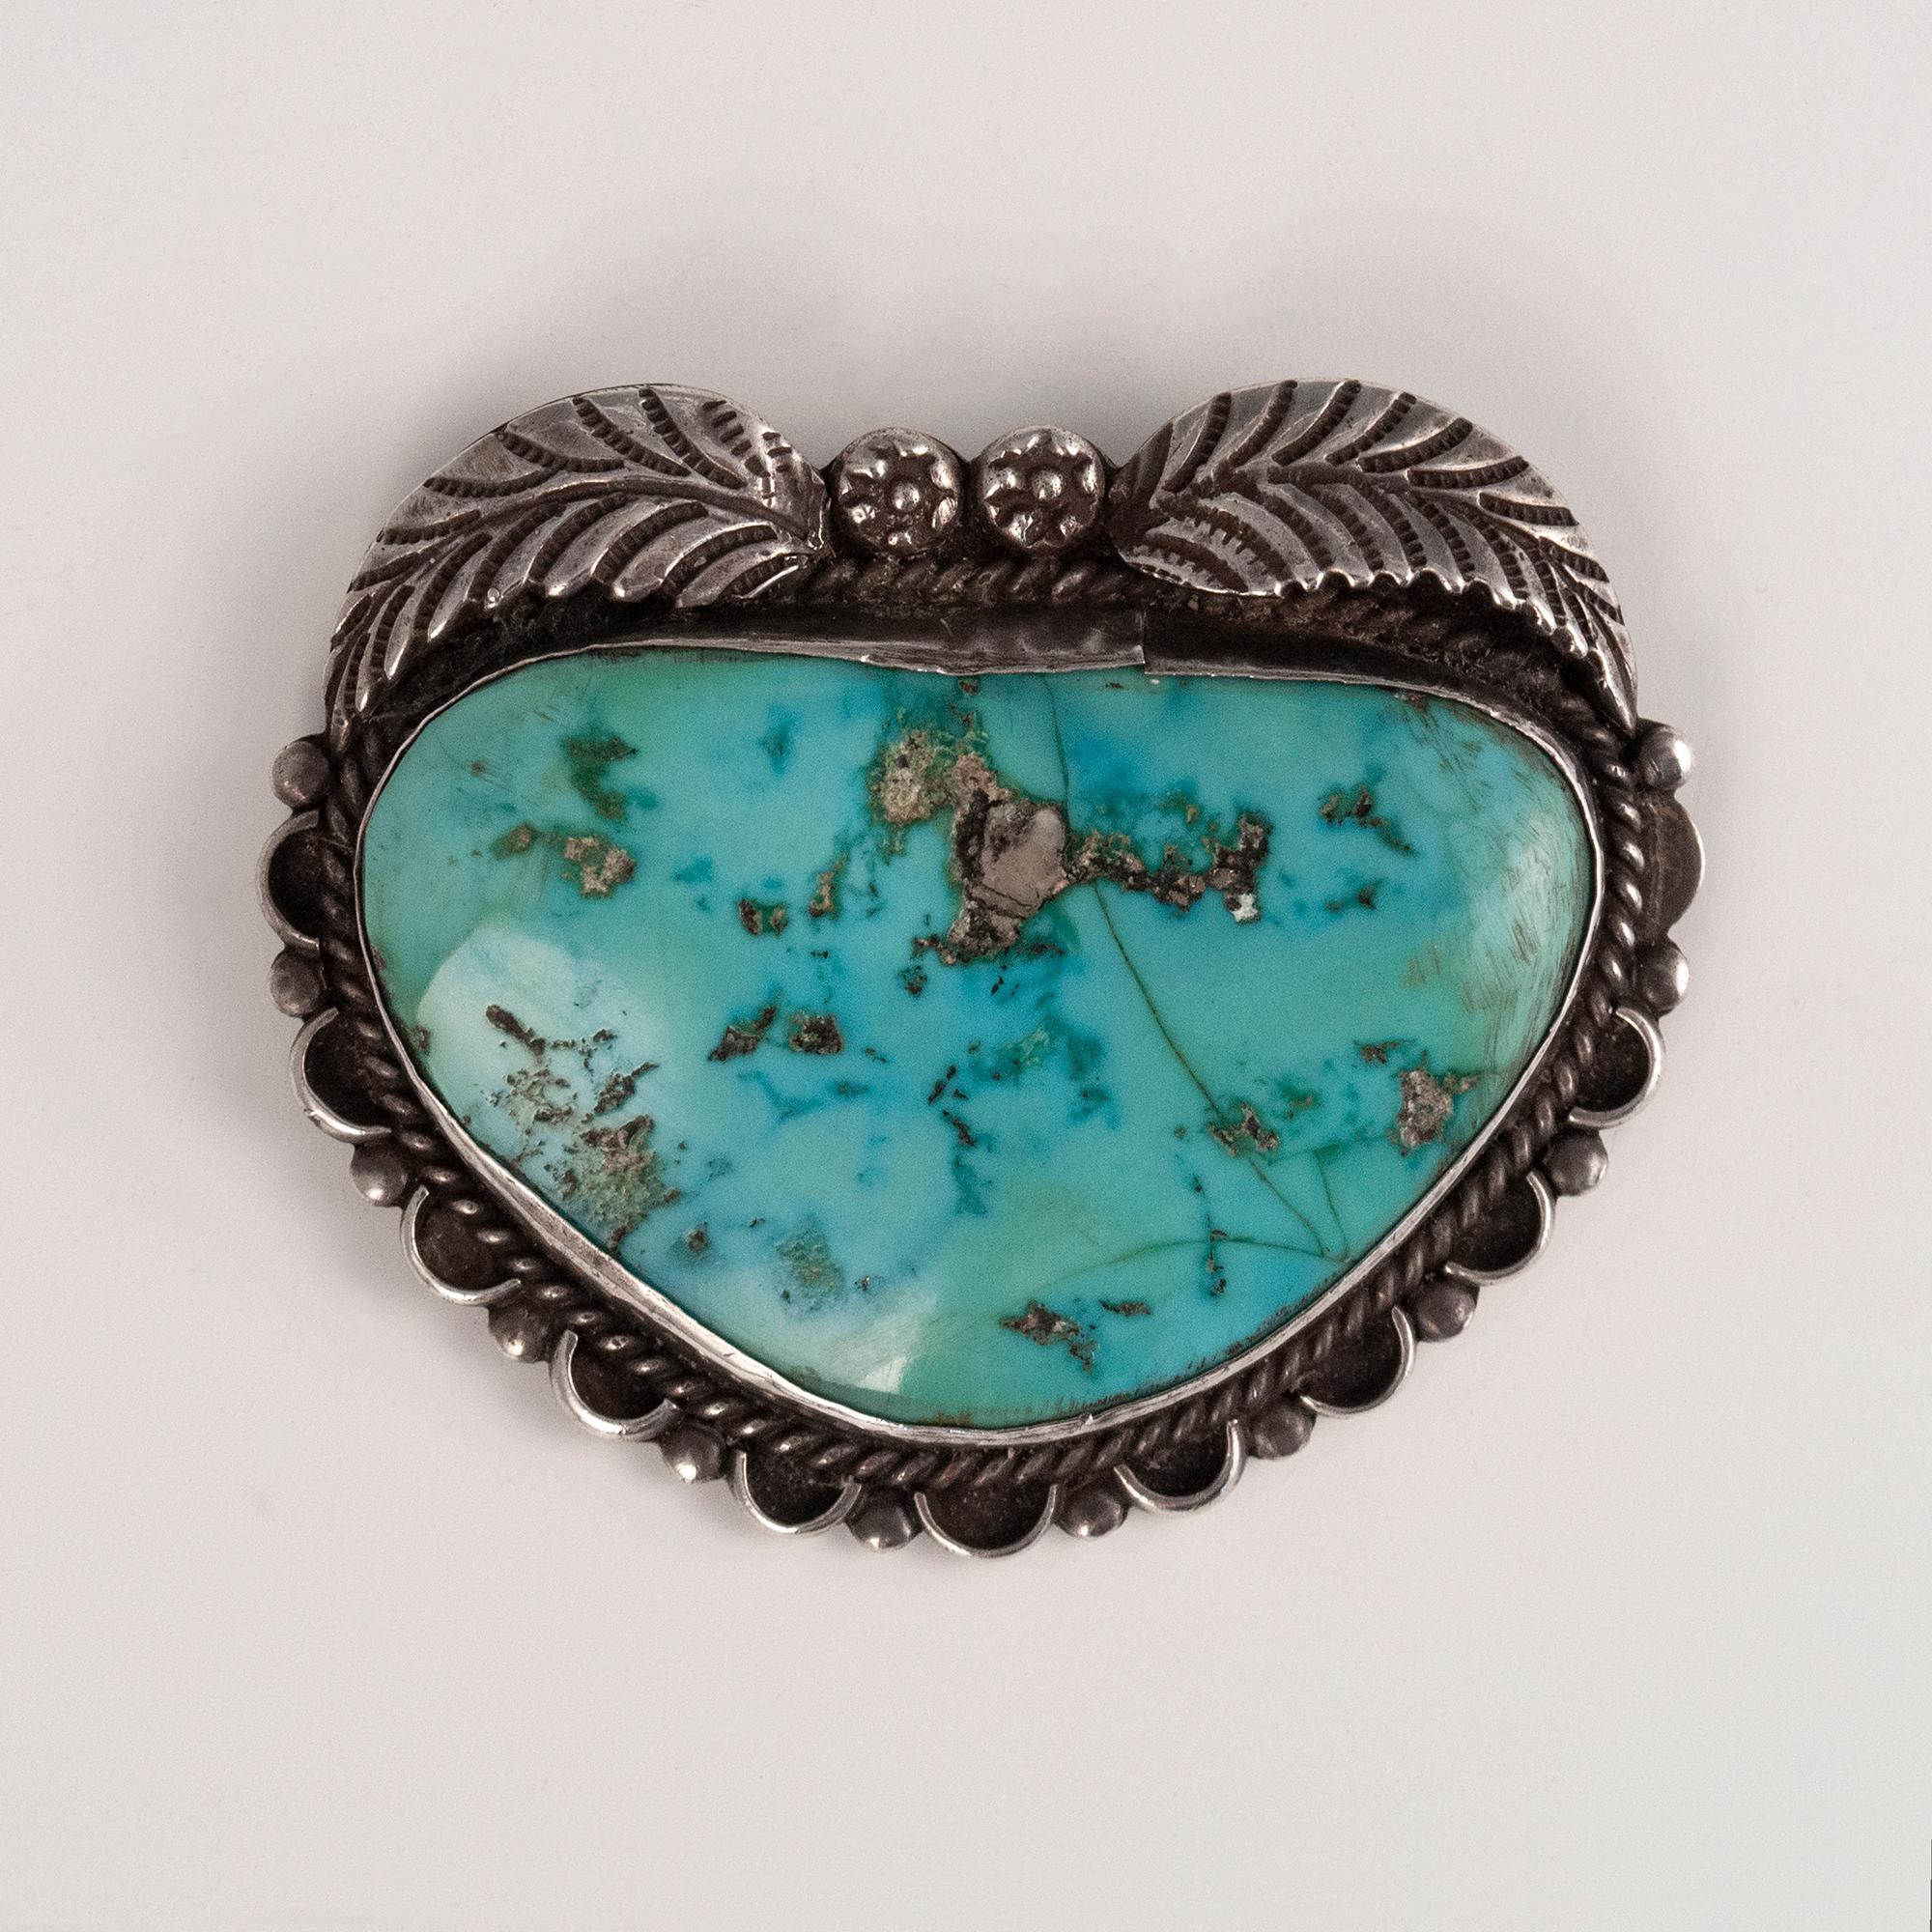 Mid-century Navajo silversmith T. K. Turquoise and silver brooch

A large gorgeous old turquoise stone set in an almost heart-shaped brooch by a Navajo silversmith with initials T.K., as marked verso. 2 by 2.5 inches. 44 grams.
    